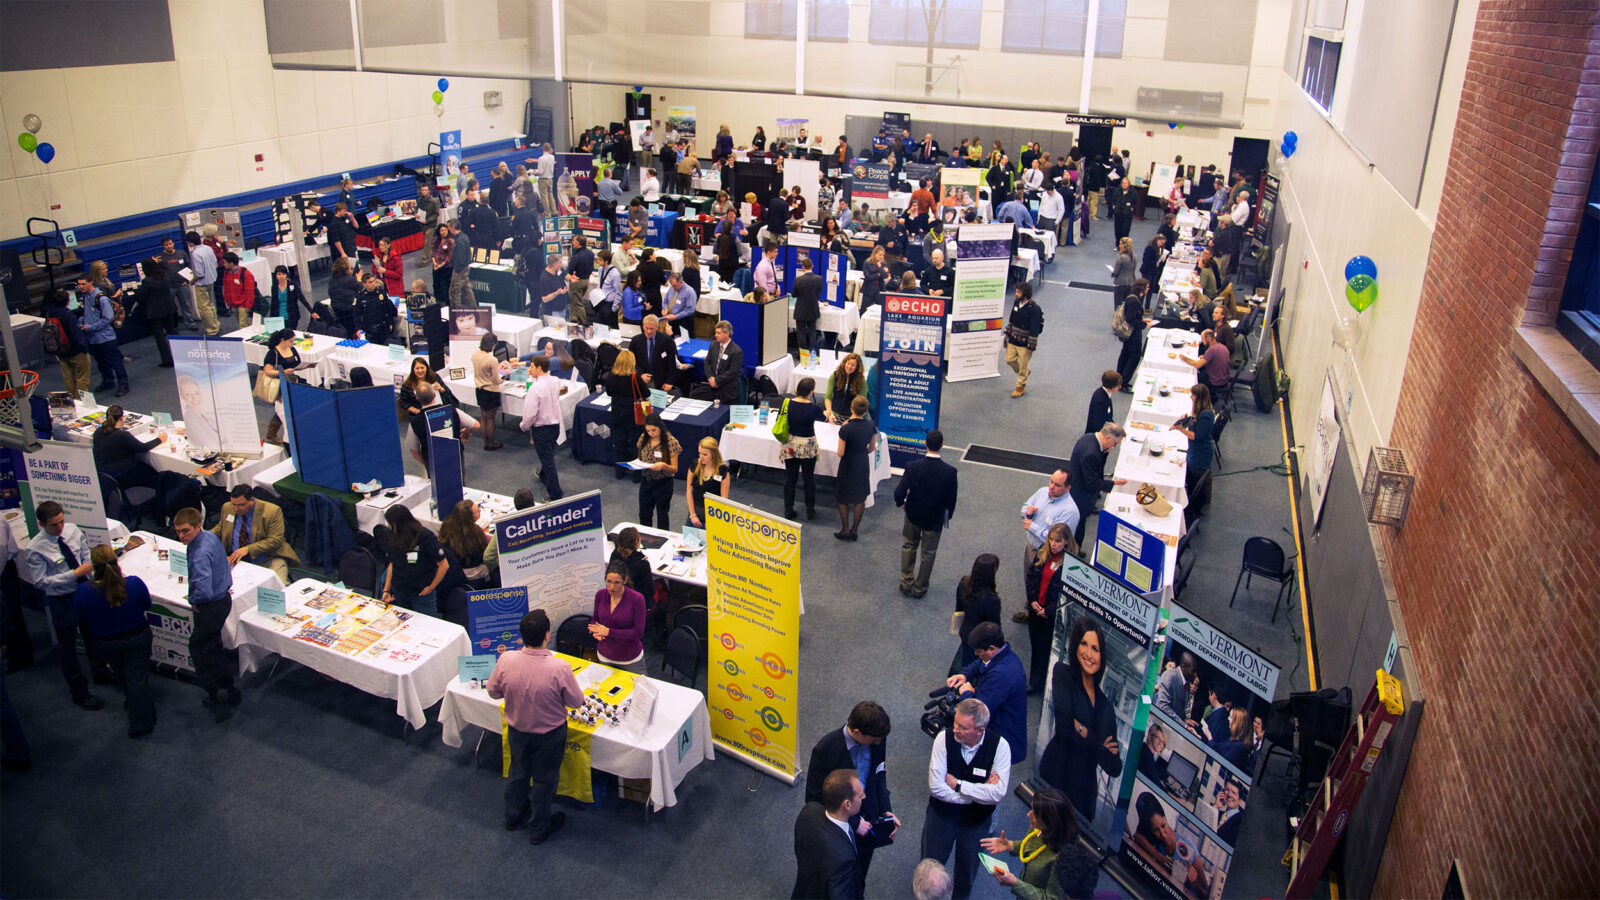 student attendees crowd the idx gymnasium for a career fair